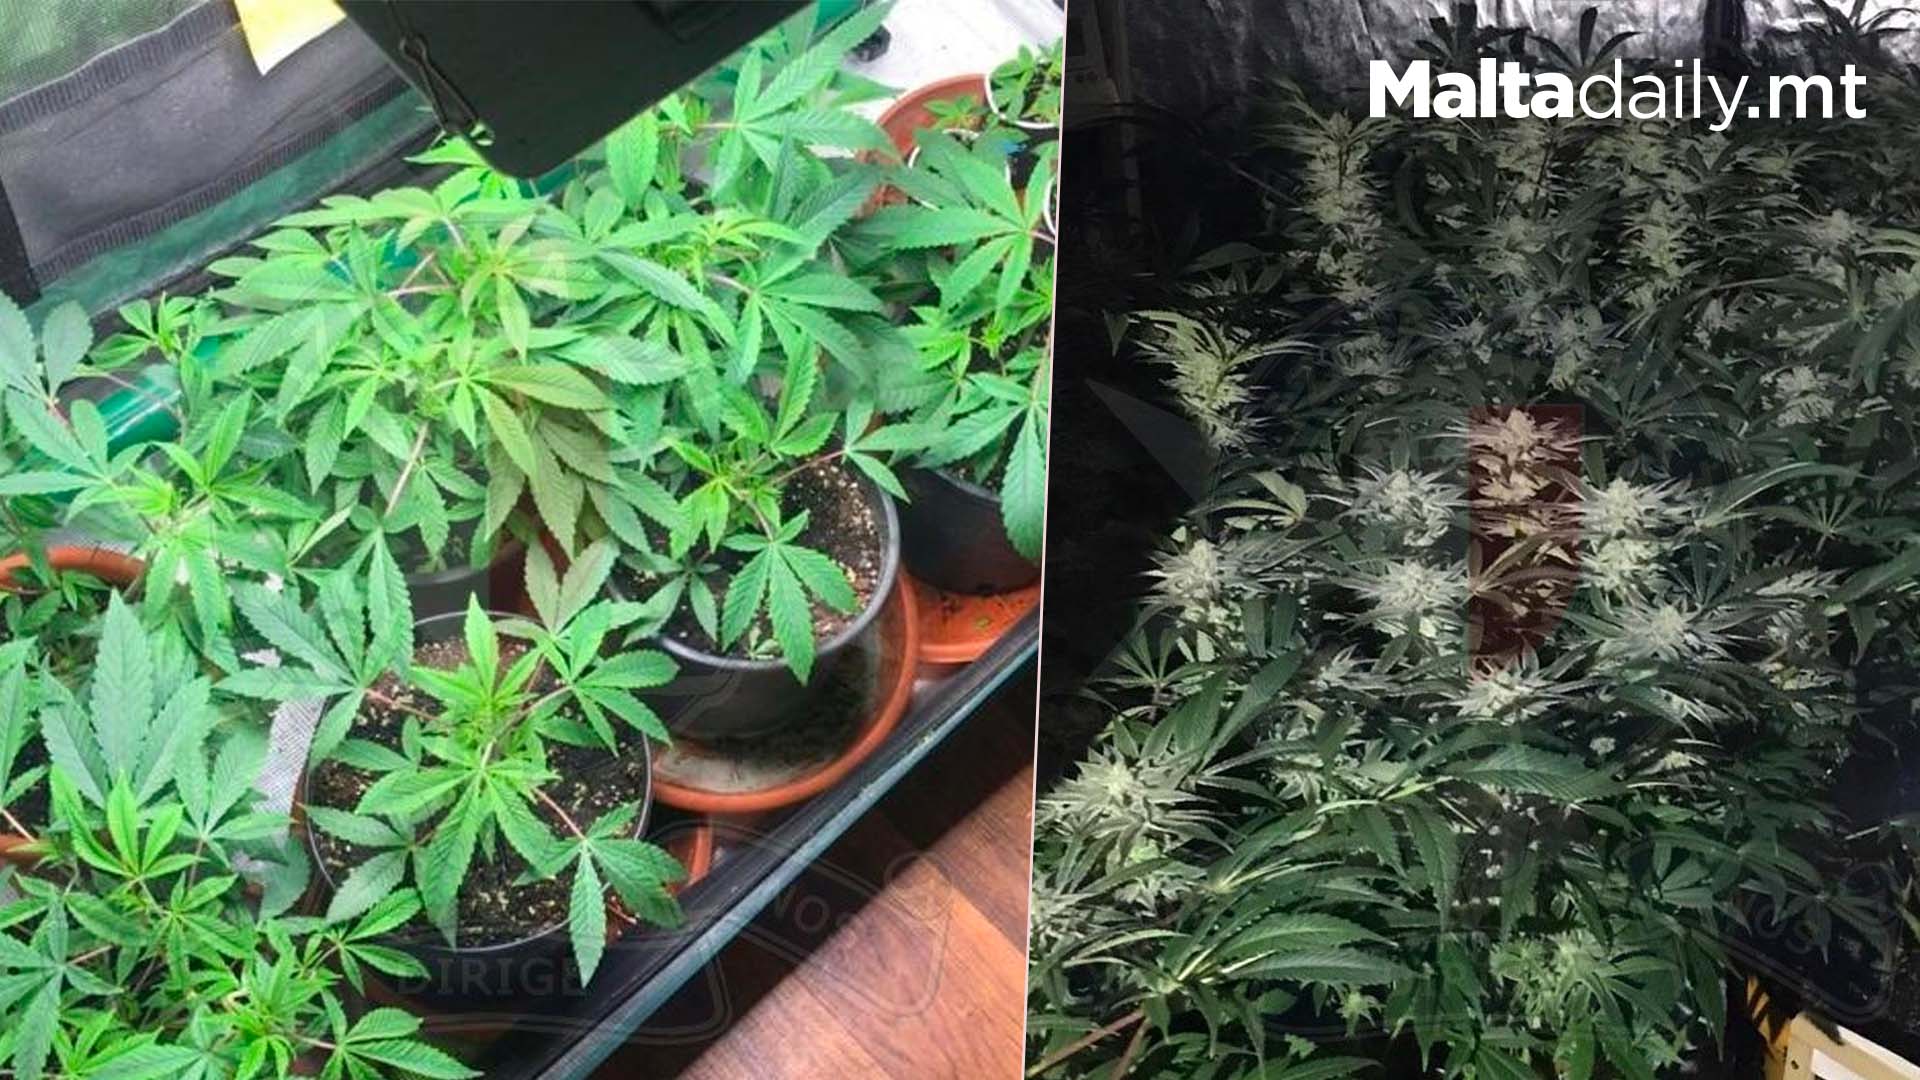 Police Arrest Man After Finding Large Amount Of Cannabis